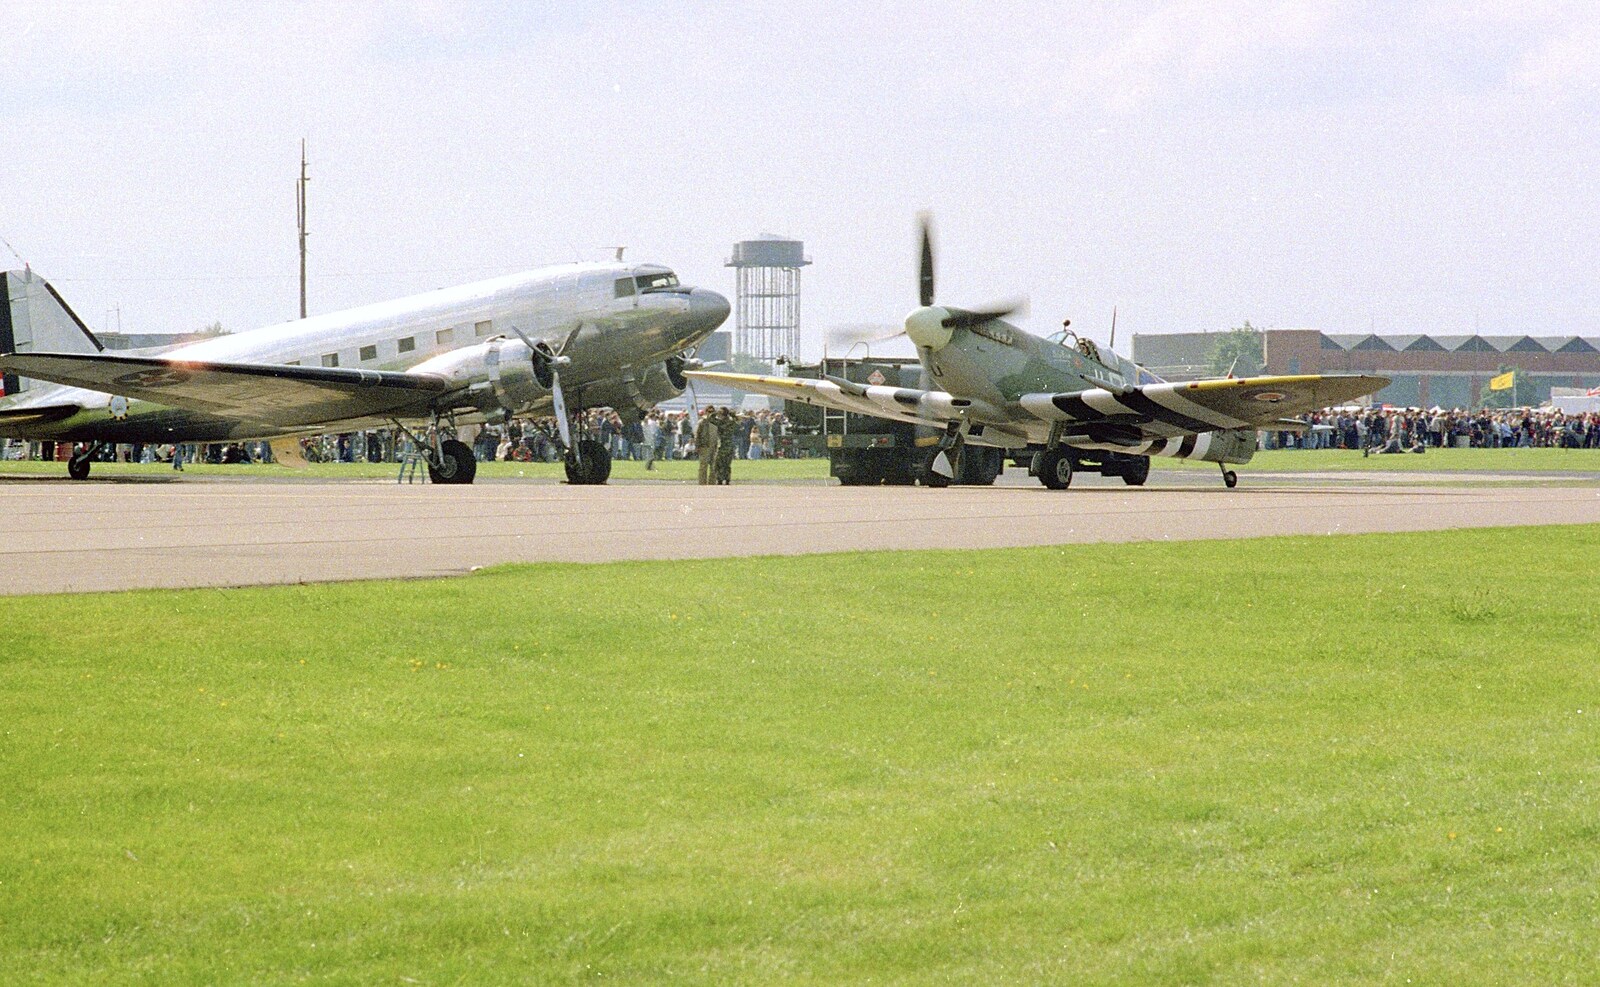 A Douglas DC3 'Dakota' and a taxiing Spitfire from The Mildenhall Air Fete, Mildenhall, Suffolk - 29th May 1994